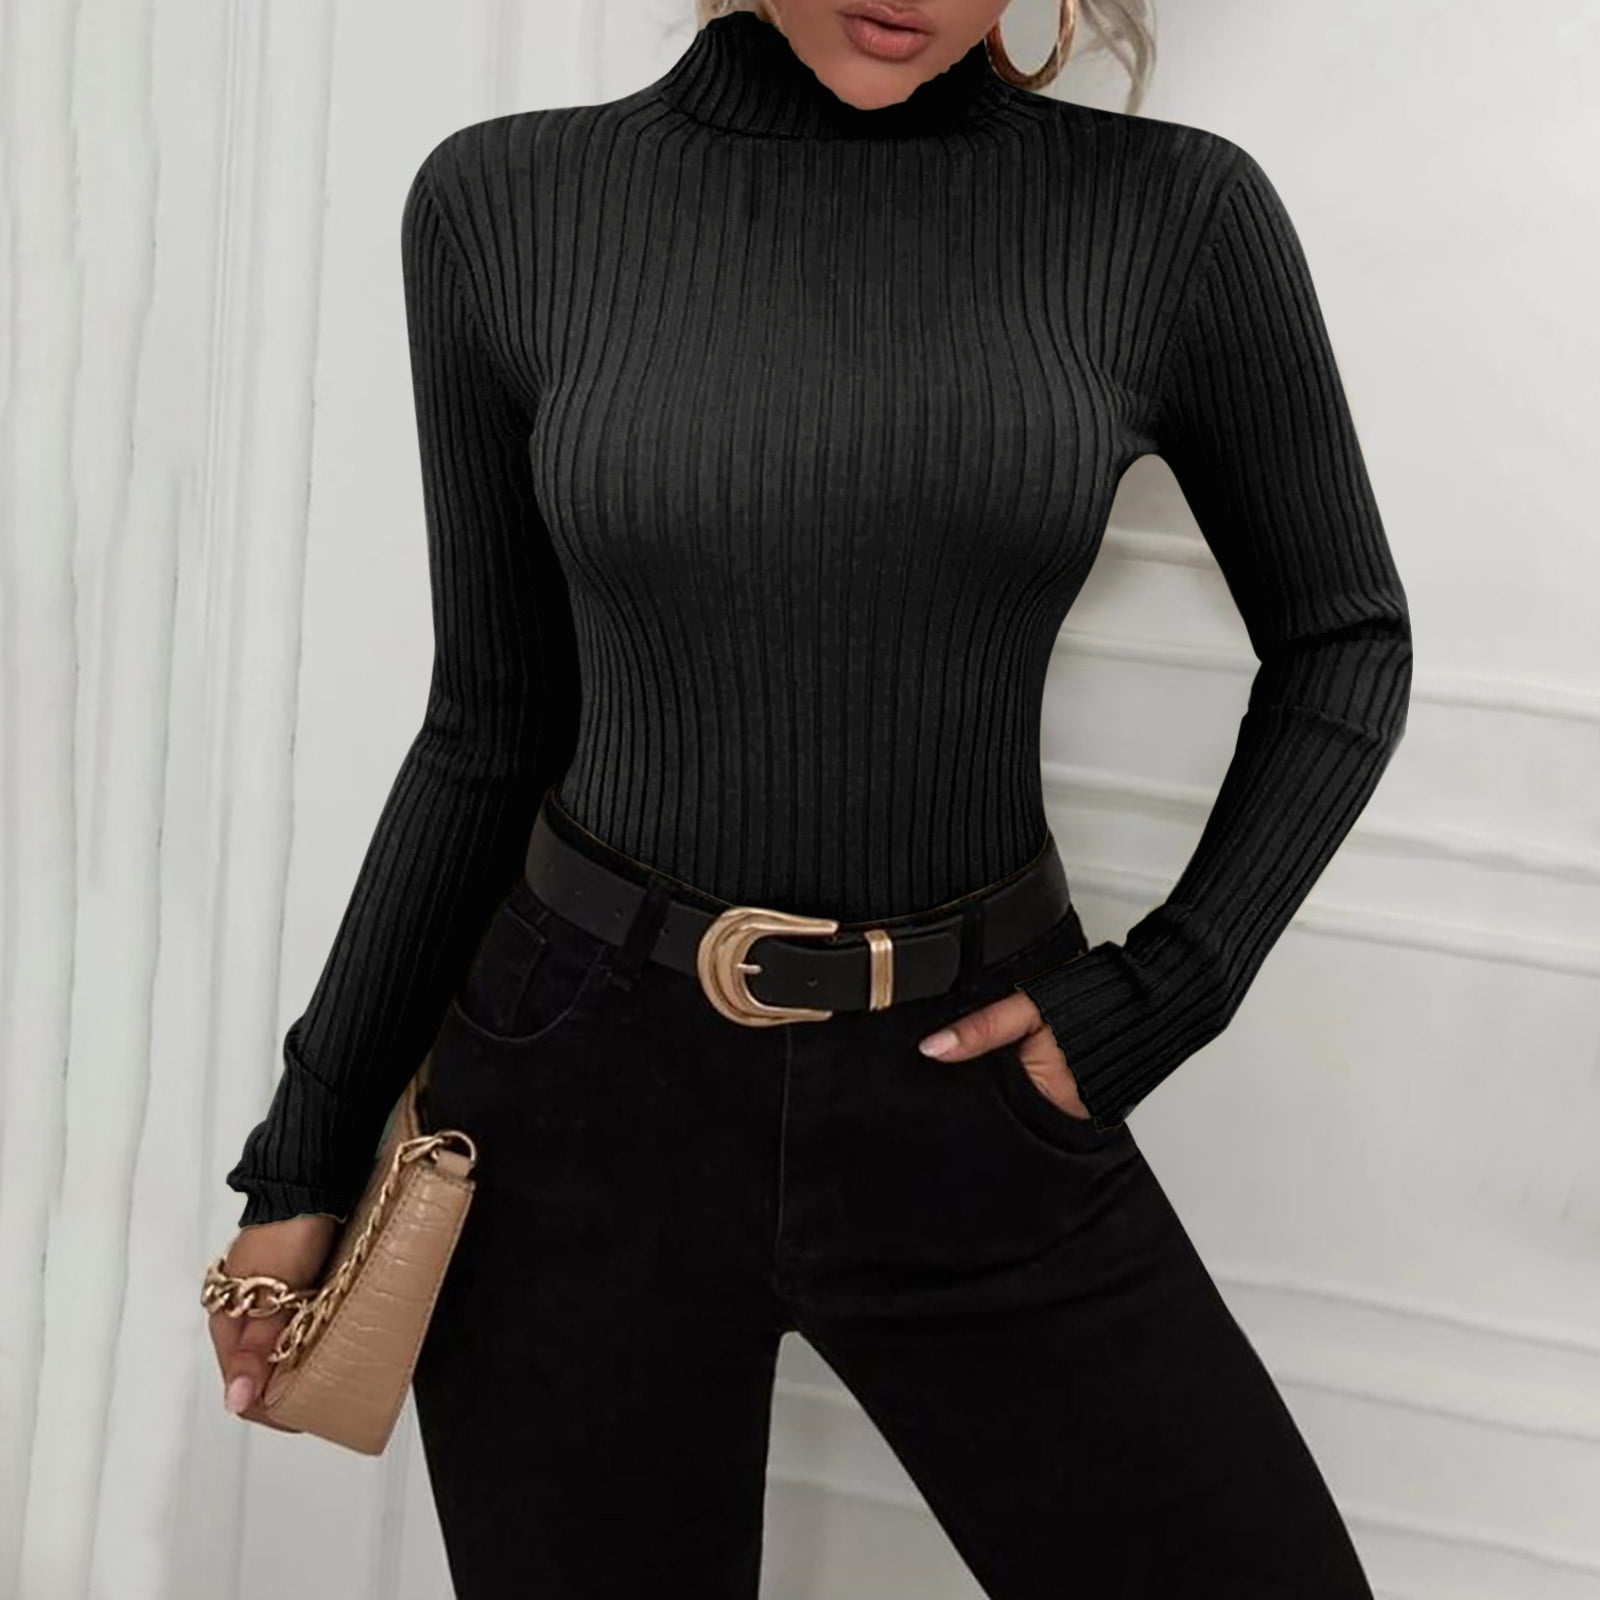 Voncos Women Turtleneck Sweaters - Pullover Casual on Clearance Long ...